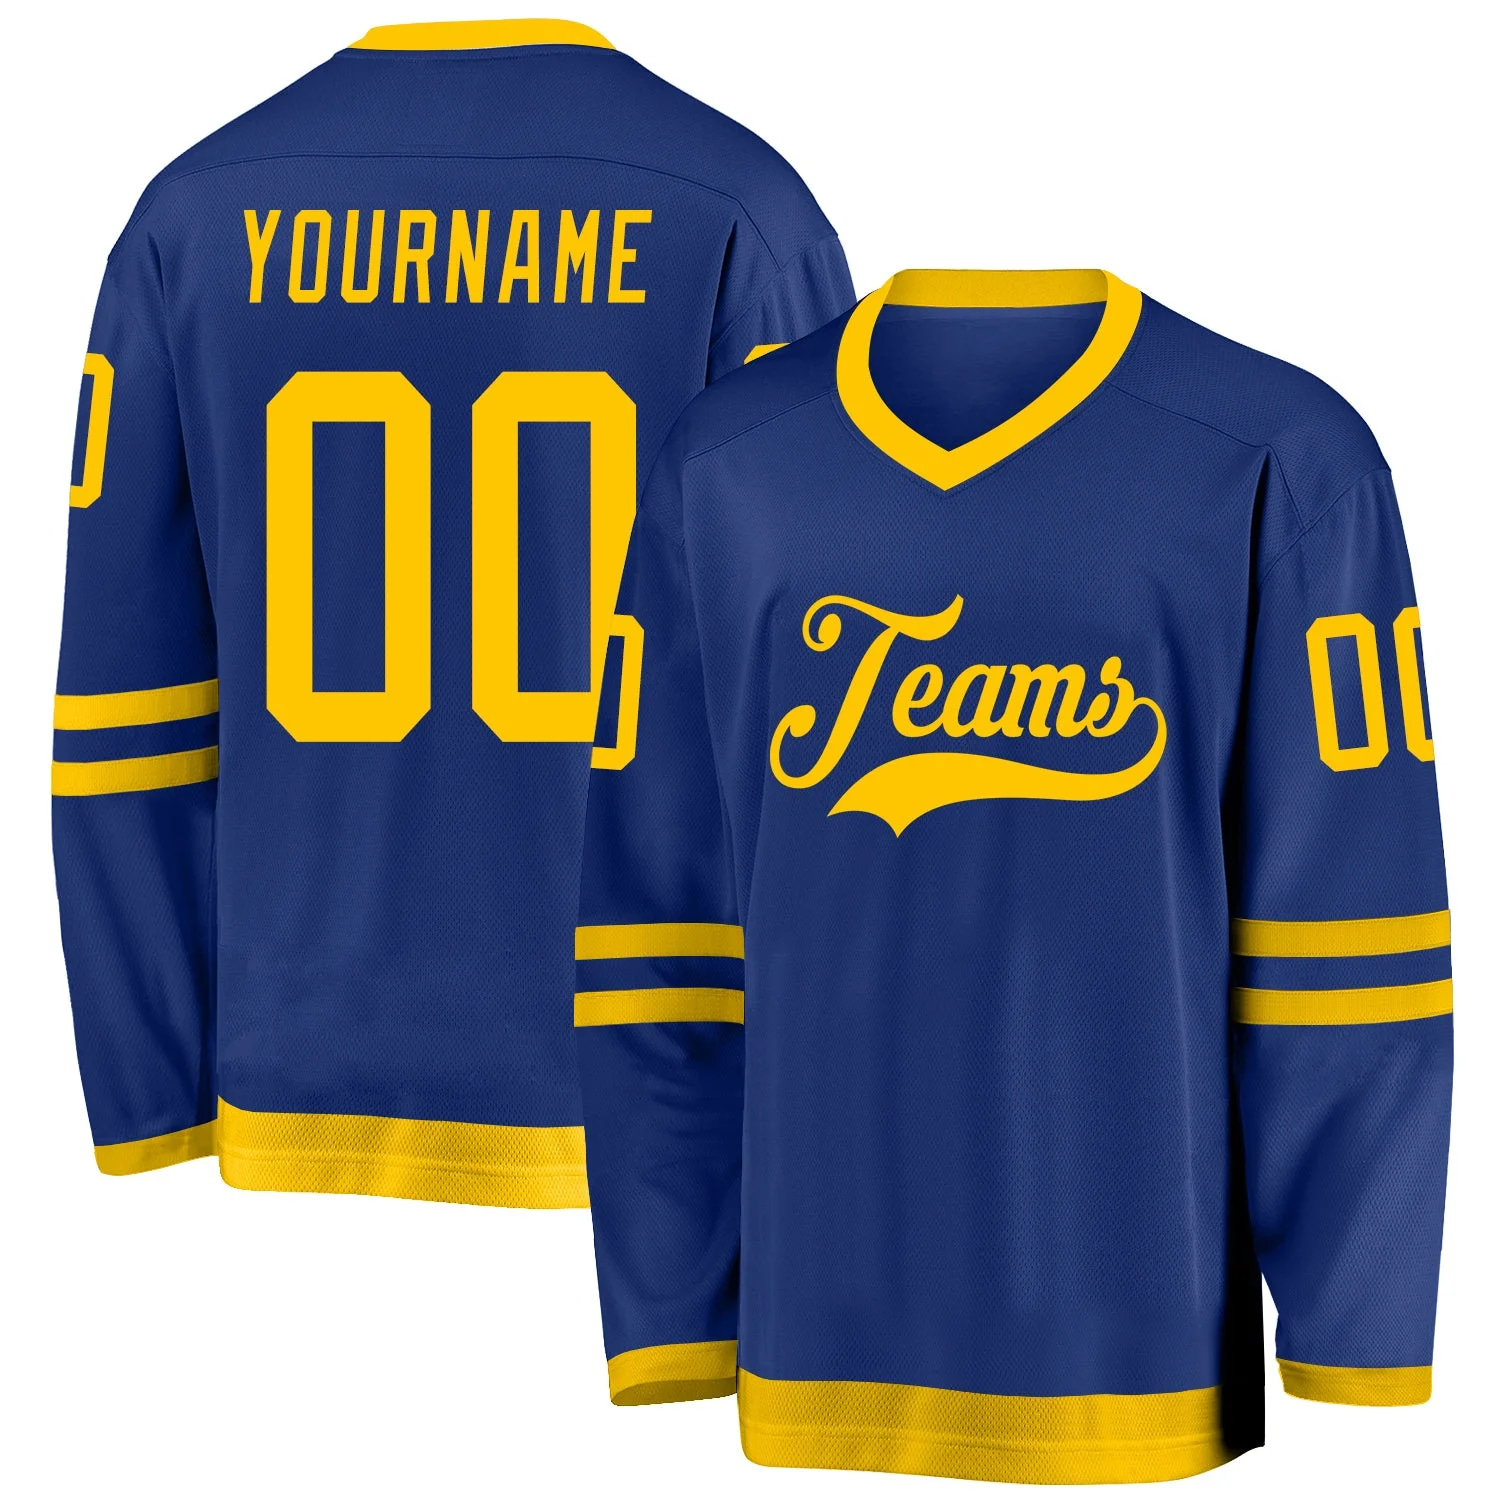 Stitched And Print Royal Gold Hockey Jersey Custom